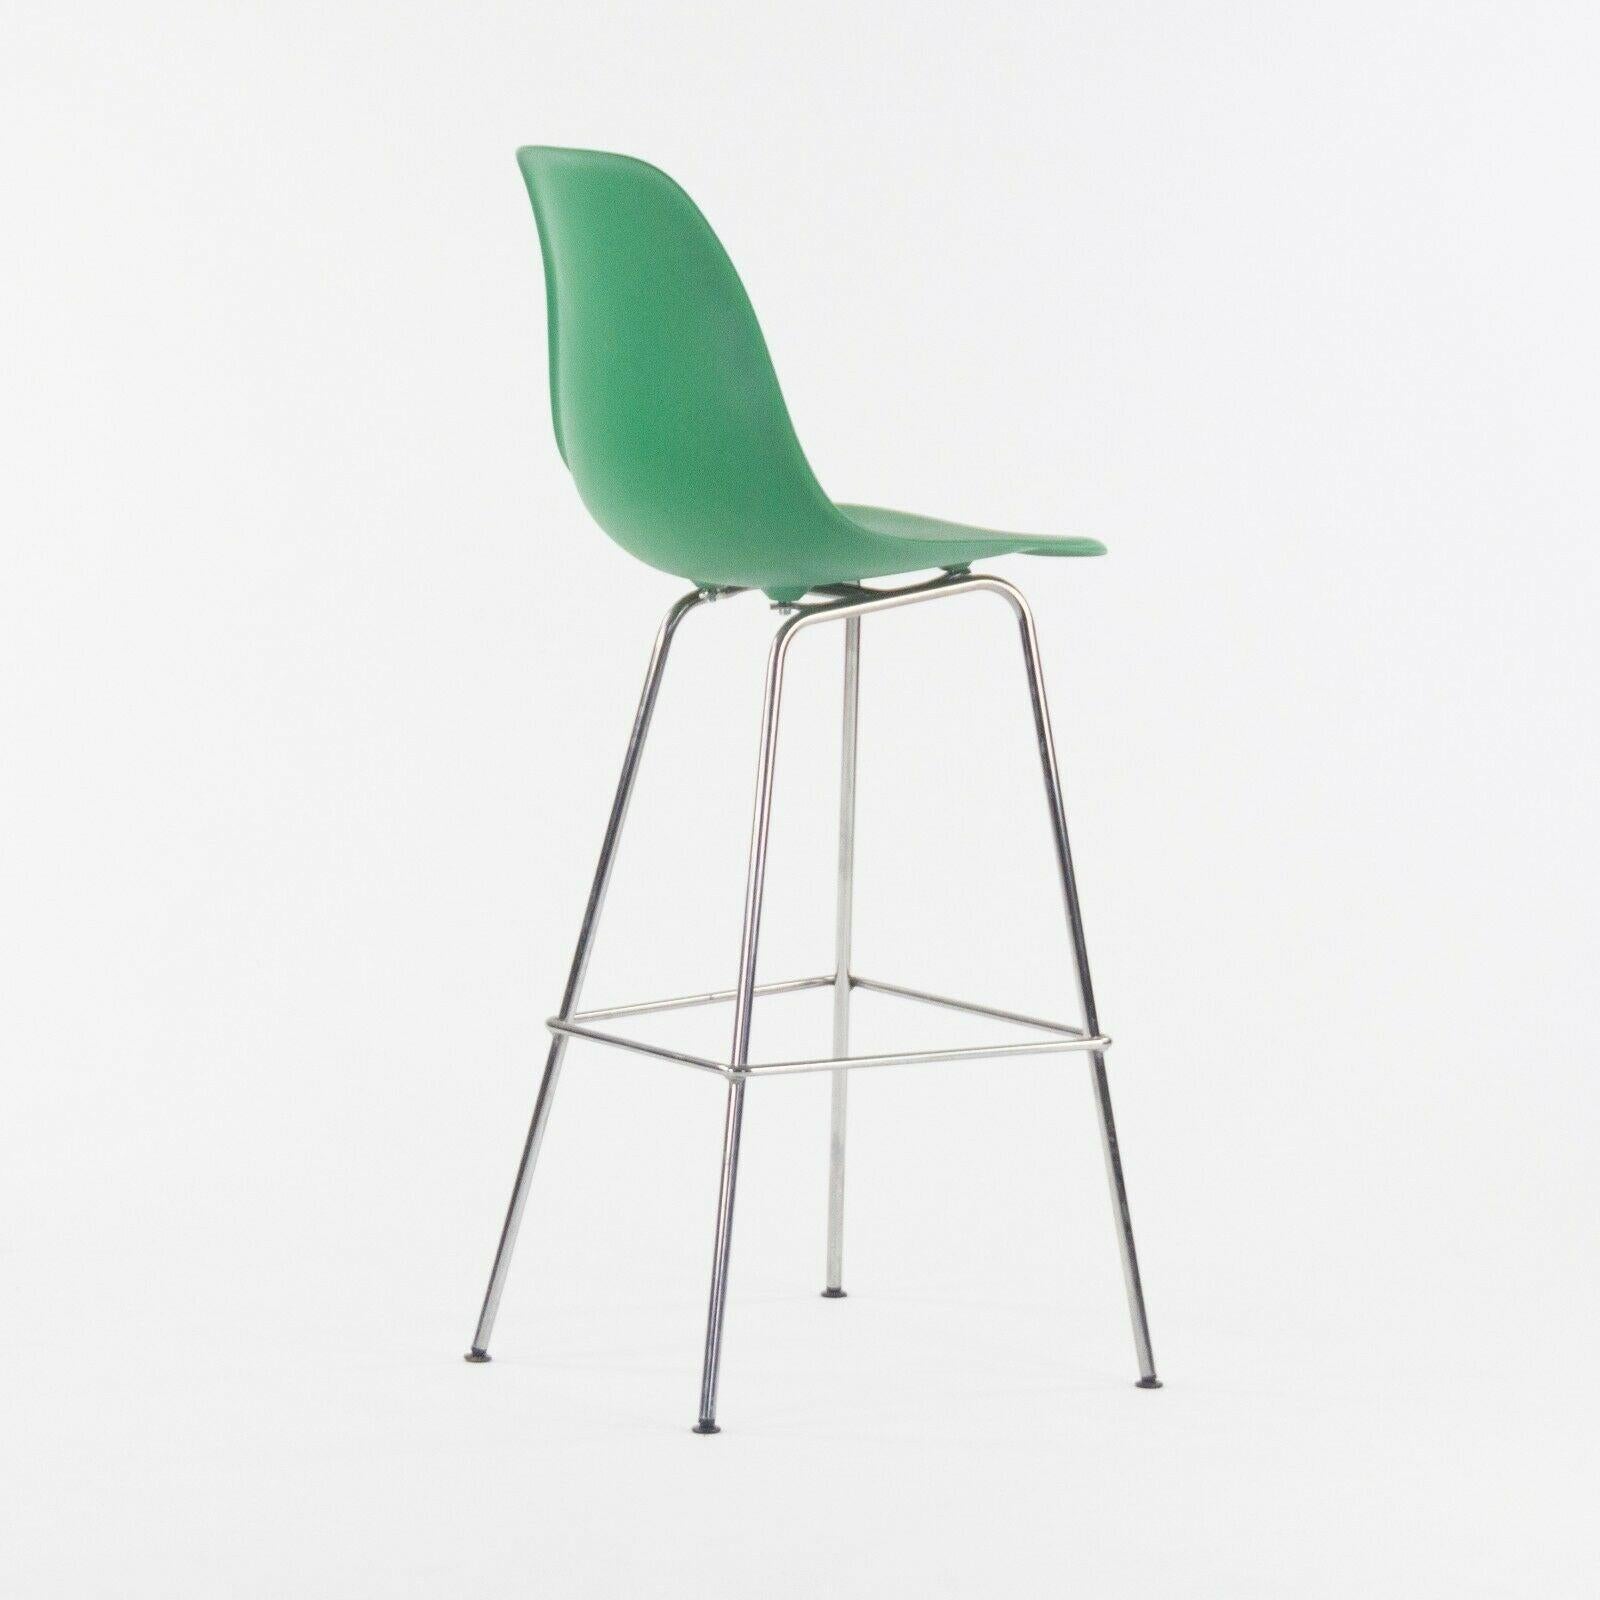 American Ray and Charles Eames Herman Miller Molded Shell Bar Stool Chair Kelly Green For Sale